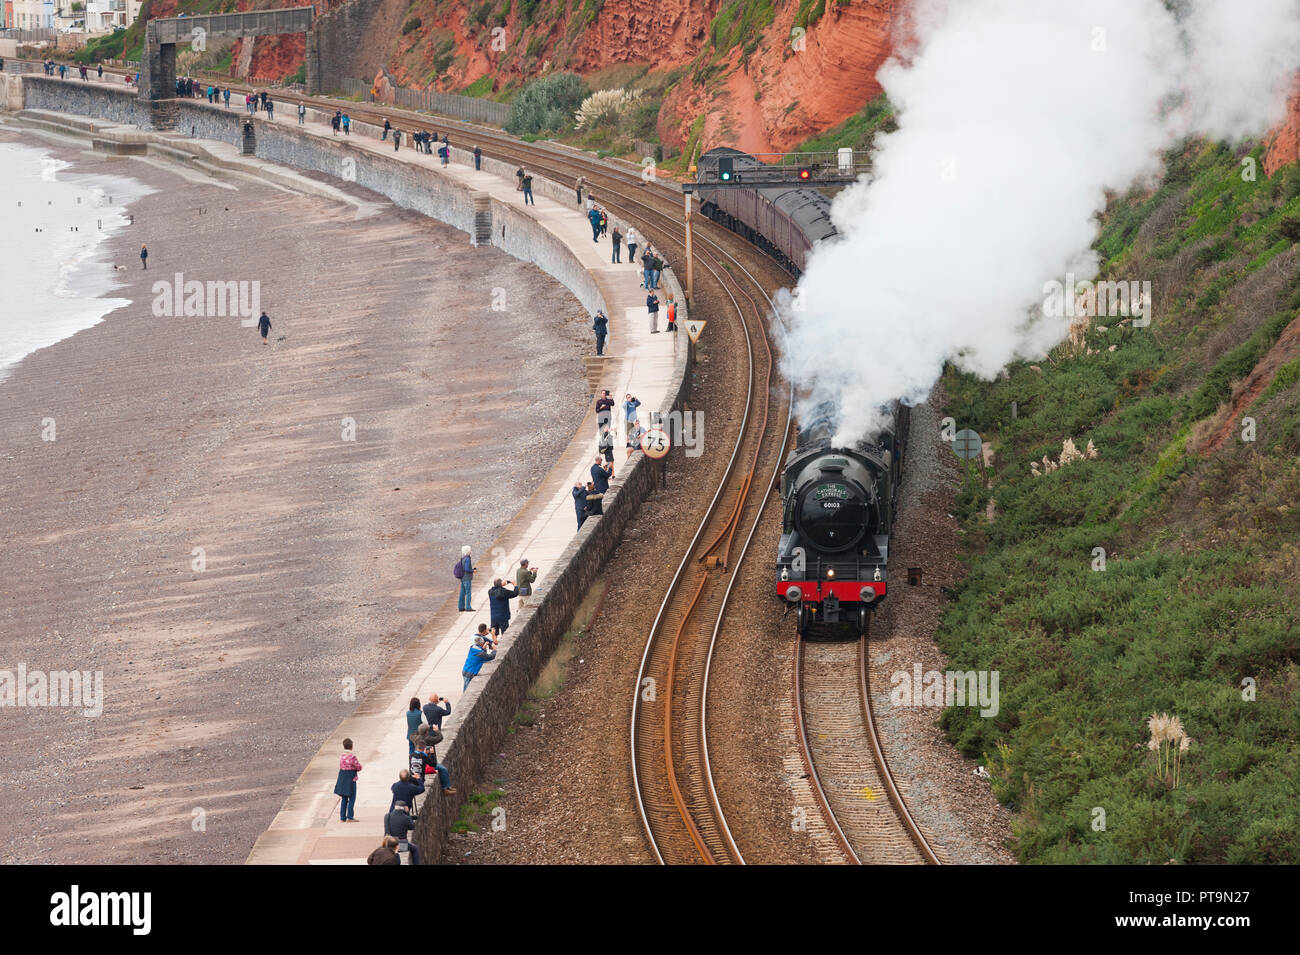 Dawlish, Devon, UK. 8th October, 2018. The Pacific Class Flying Scotsman 60103 and Stanier Black Five 44871 steam locomotives pull a train along the seafront at Dawlish, Devon, UK. Credit: Theo Moye/Alamy Live News Stock Photo